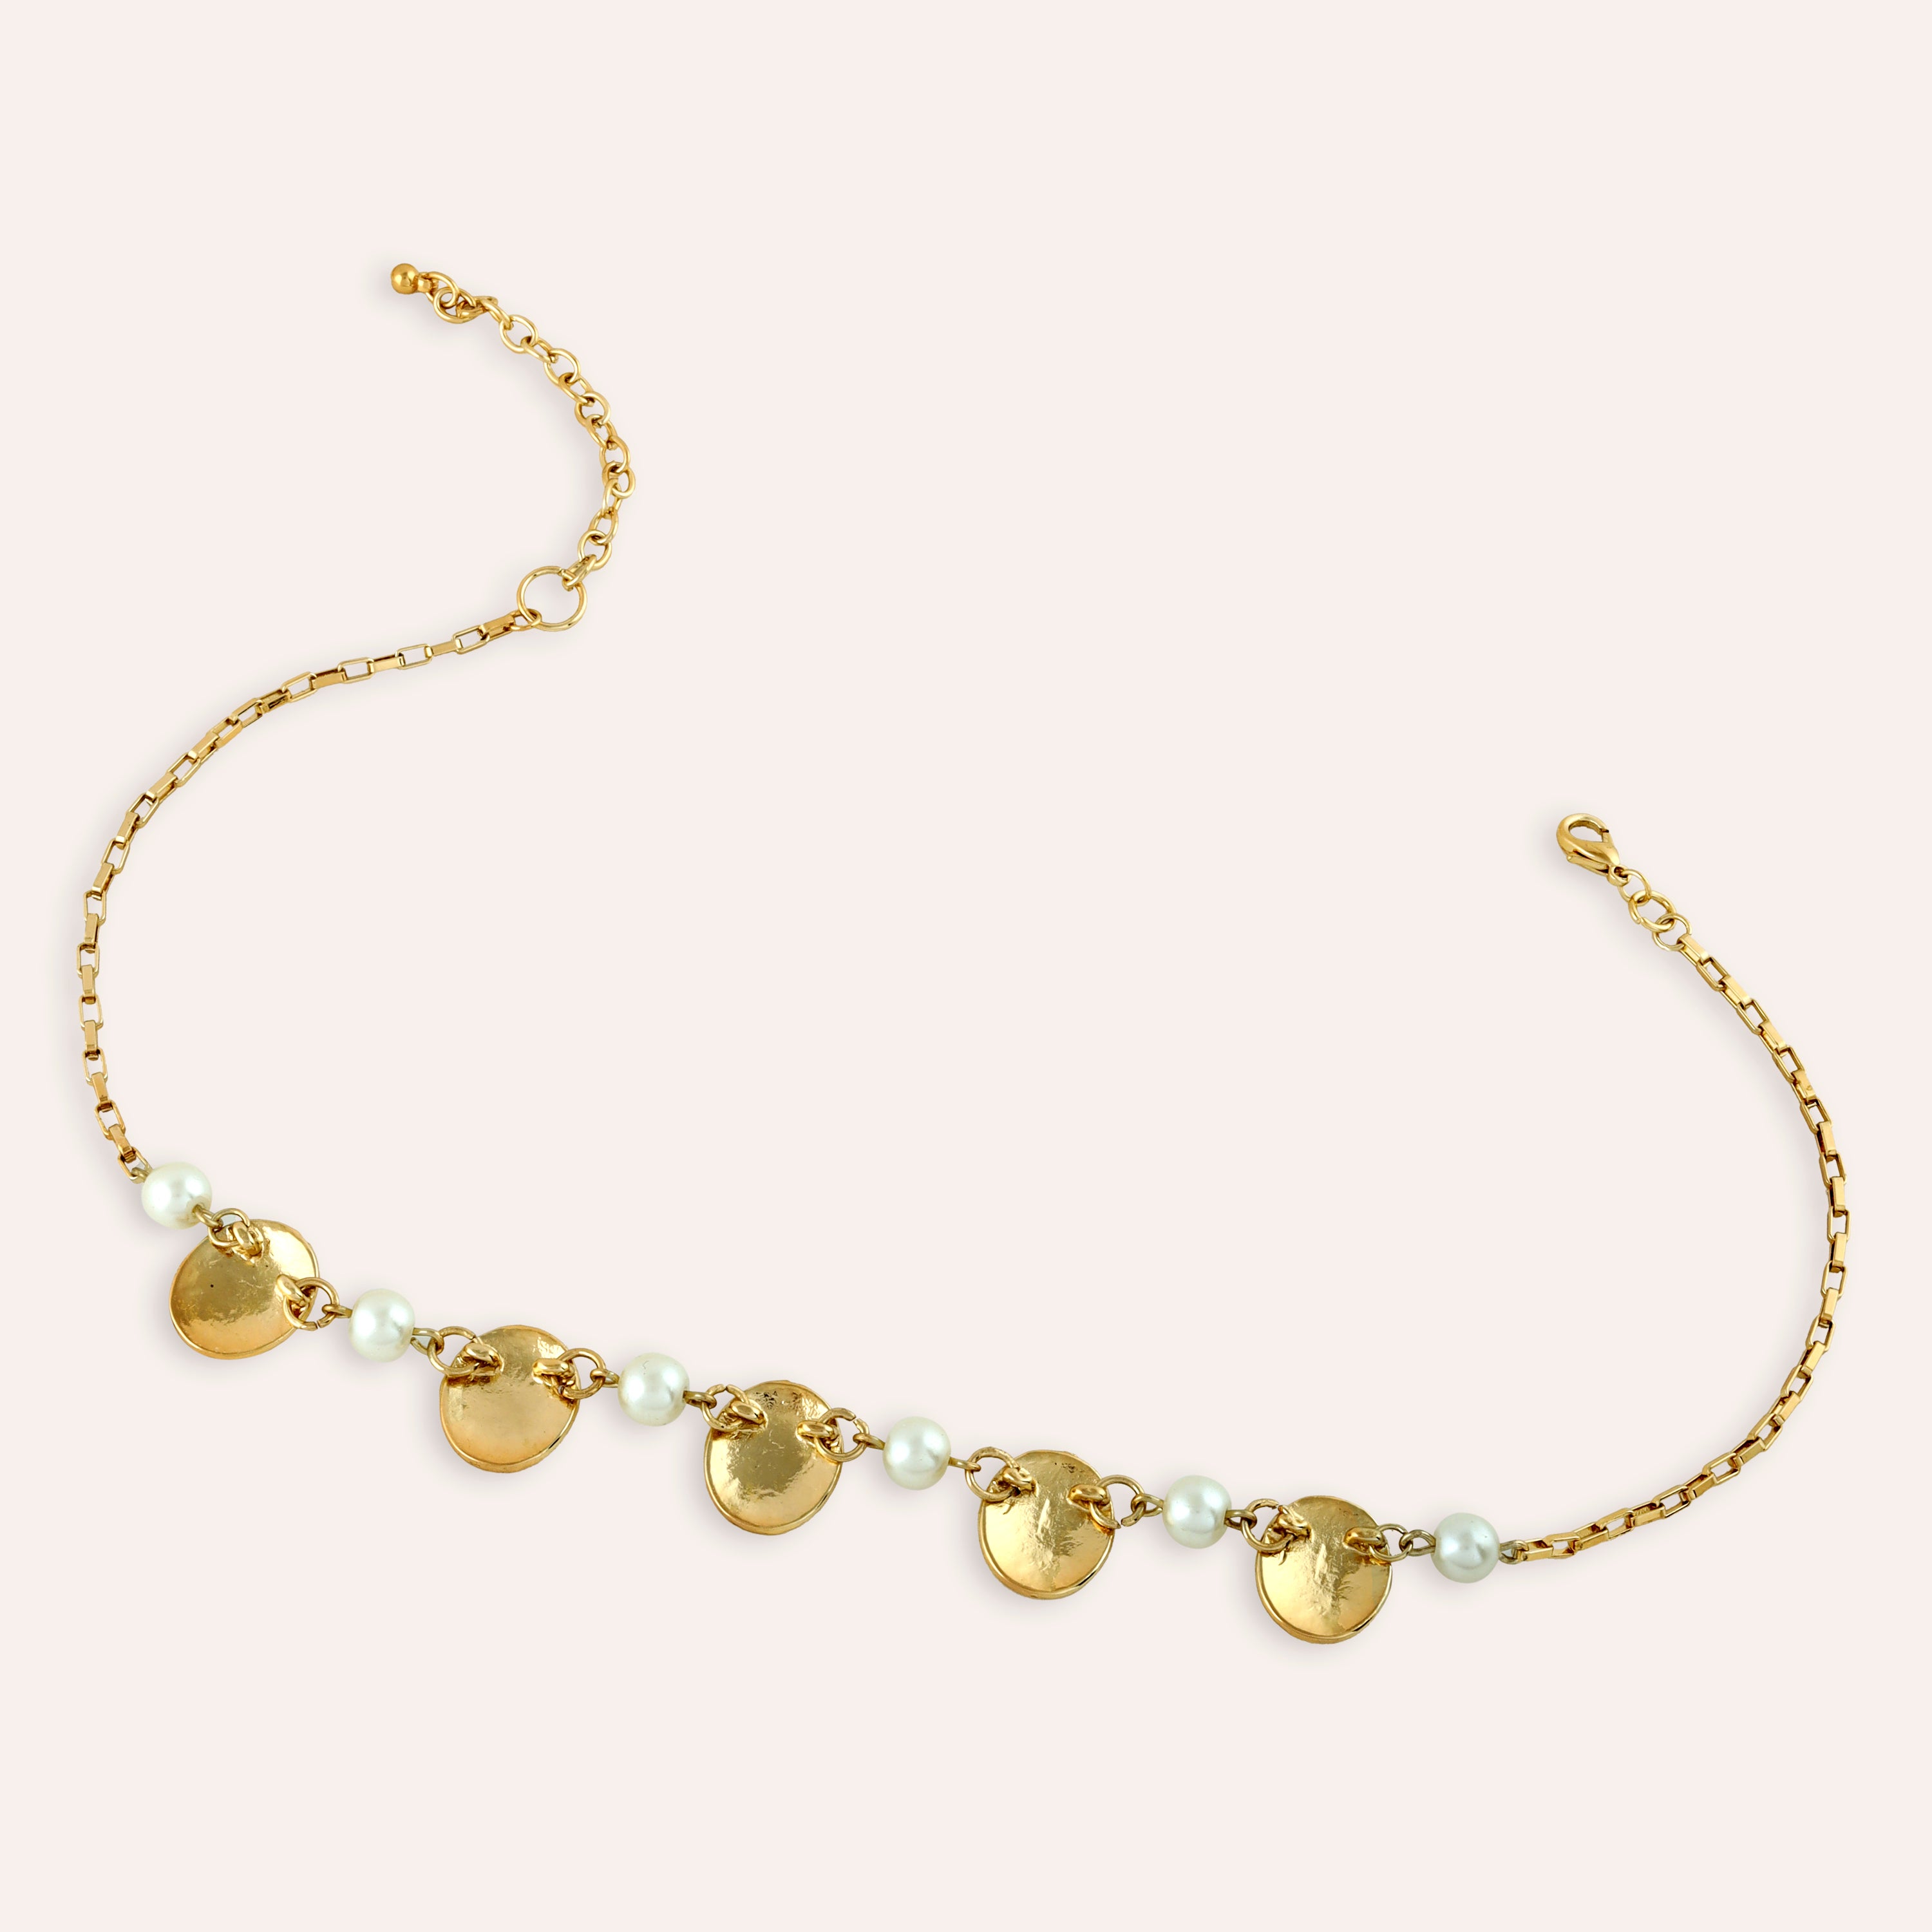 TFC Delightful Gold Plated Pearl Necklace-Enhance your elegance with our collection of gold-plated necklaces for women. Choose from stunning pendant necklaces, chic choker necklaces, and trendy layered necklaces. Our sleek and dainty designs are both affordable and anti-tarnish, ensuring lasting beauty. Enjoy the cheapest fashion jewellery, lightweight and stylish- only at The Fun Company